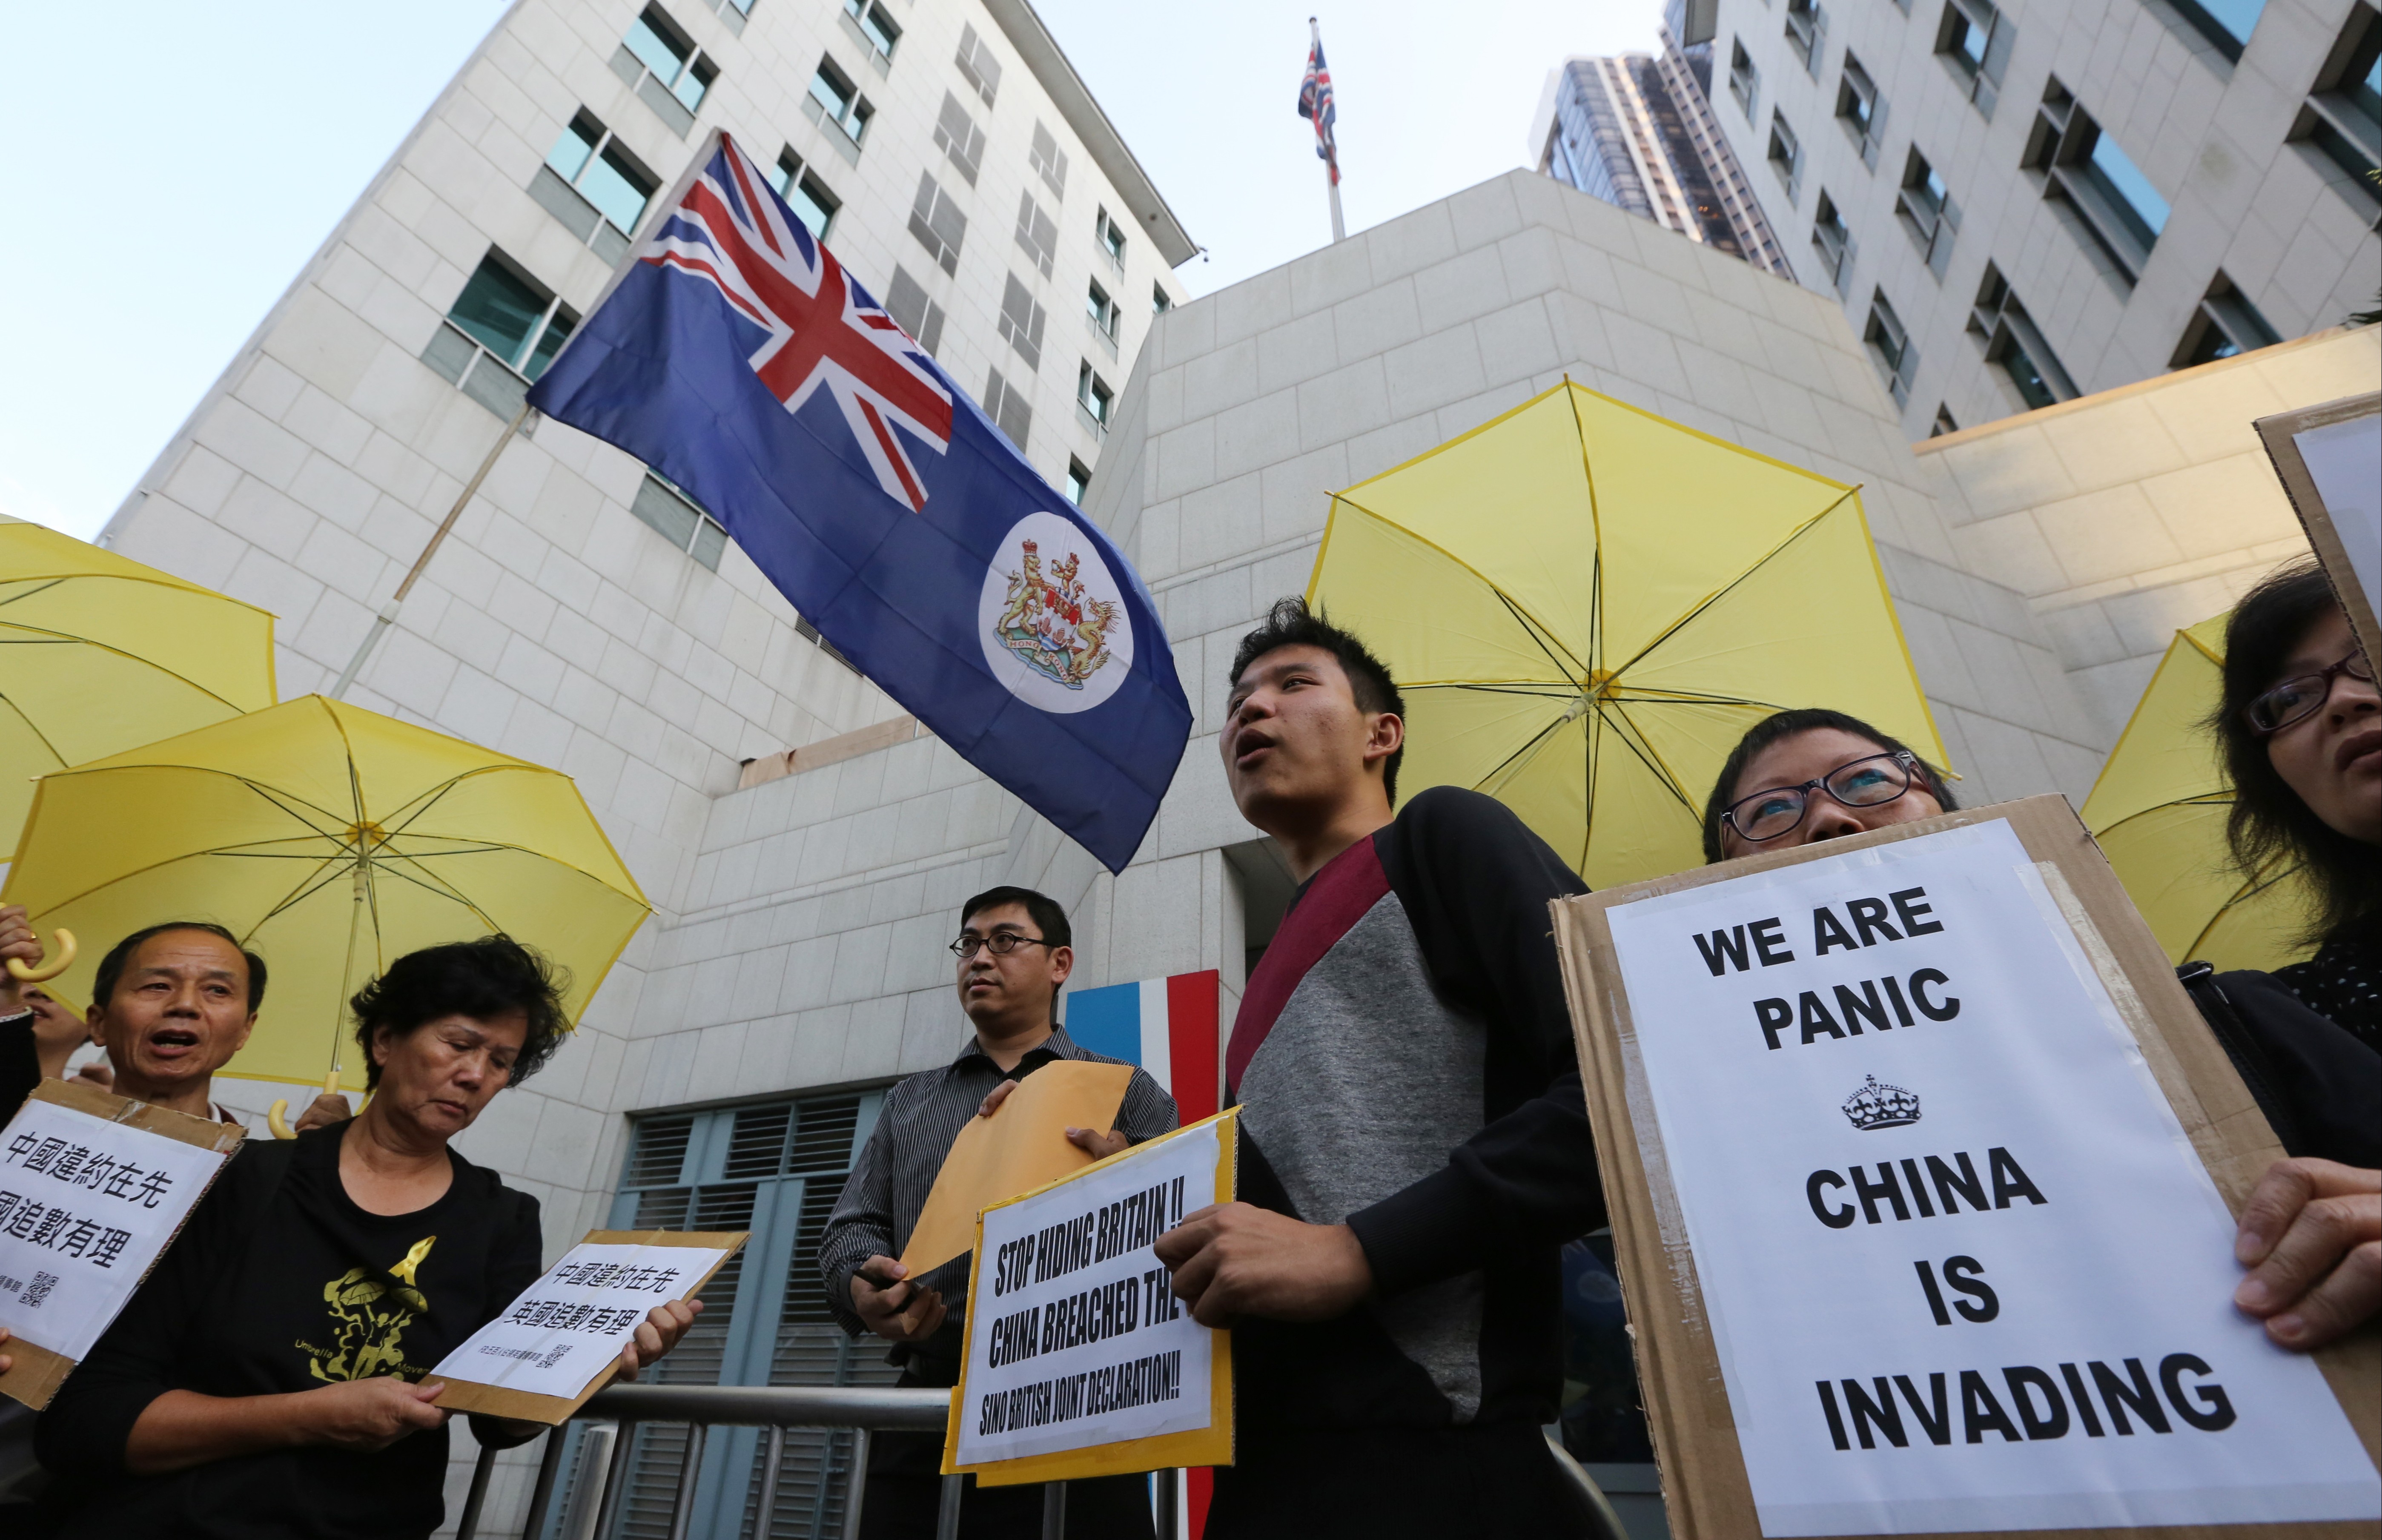 Pro-democracy demonstrators hold the colonial flag and symbolic yellow umbrellas as they stage a protest outside the British consulate in Admiralty, on November 21, 2014, during the Occupy movement in Hong Kong. Photo: Felix Wong